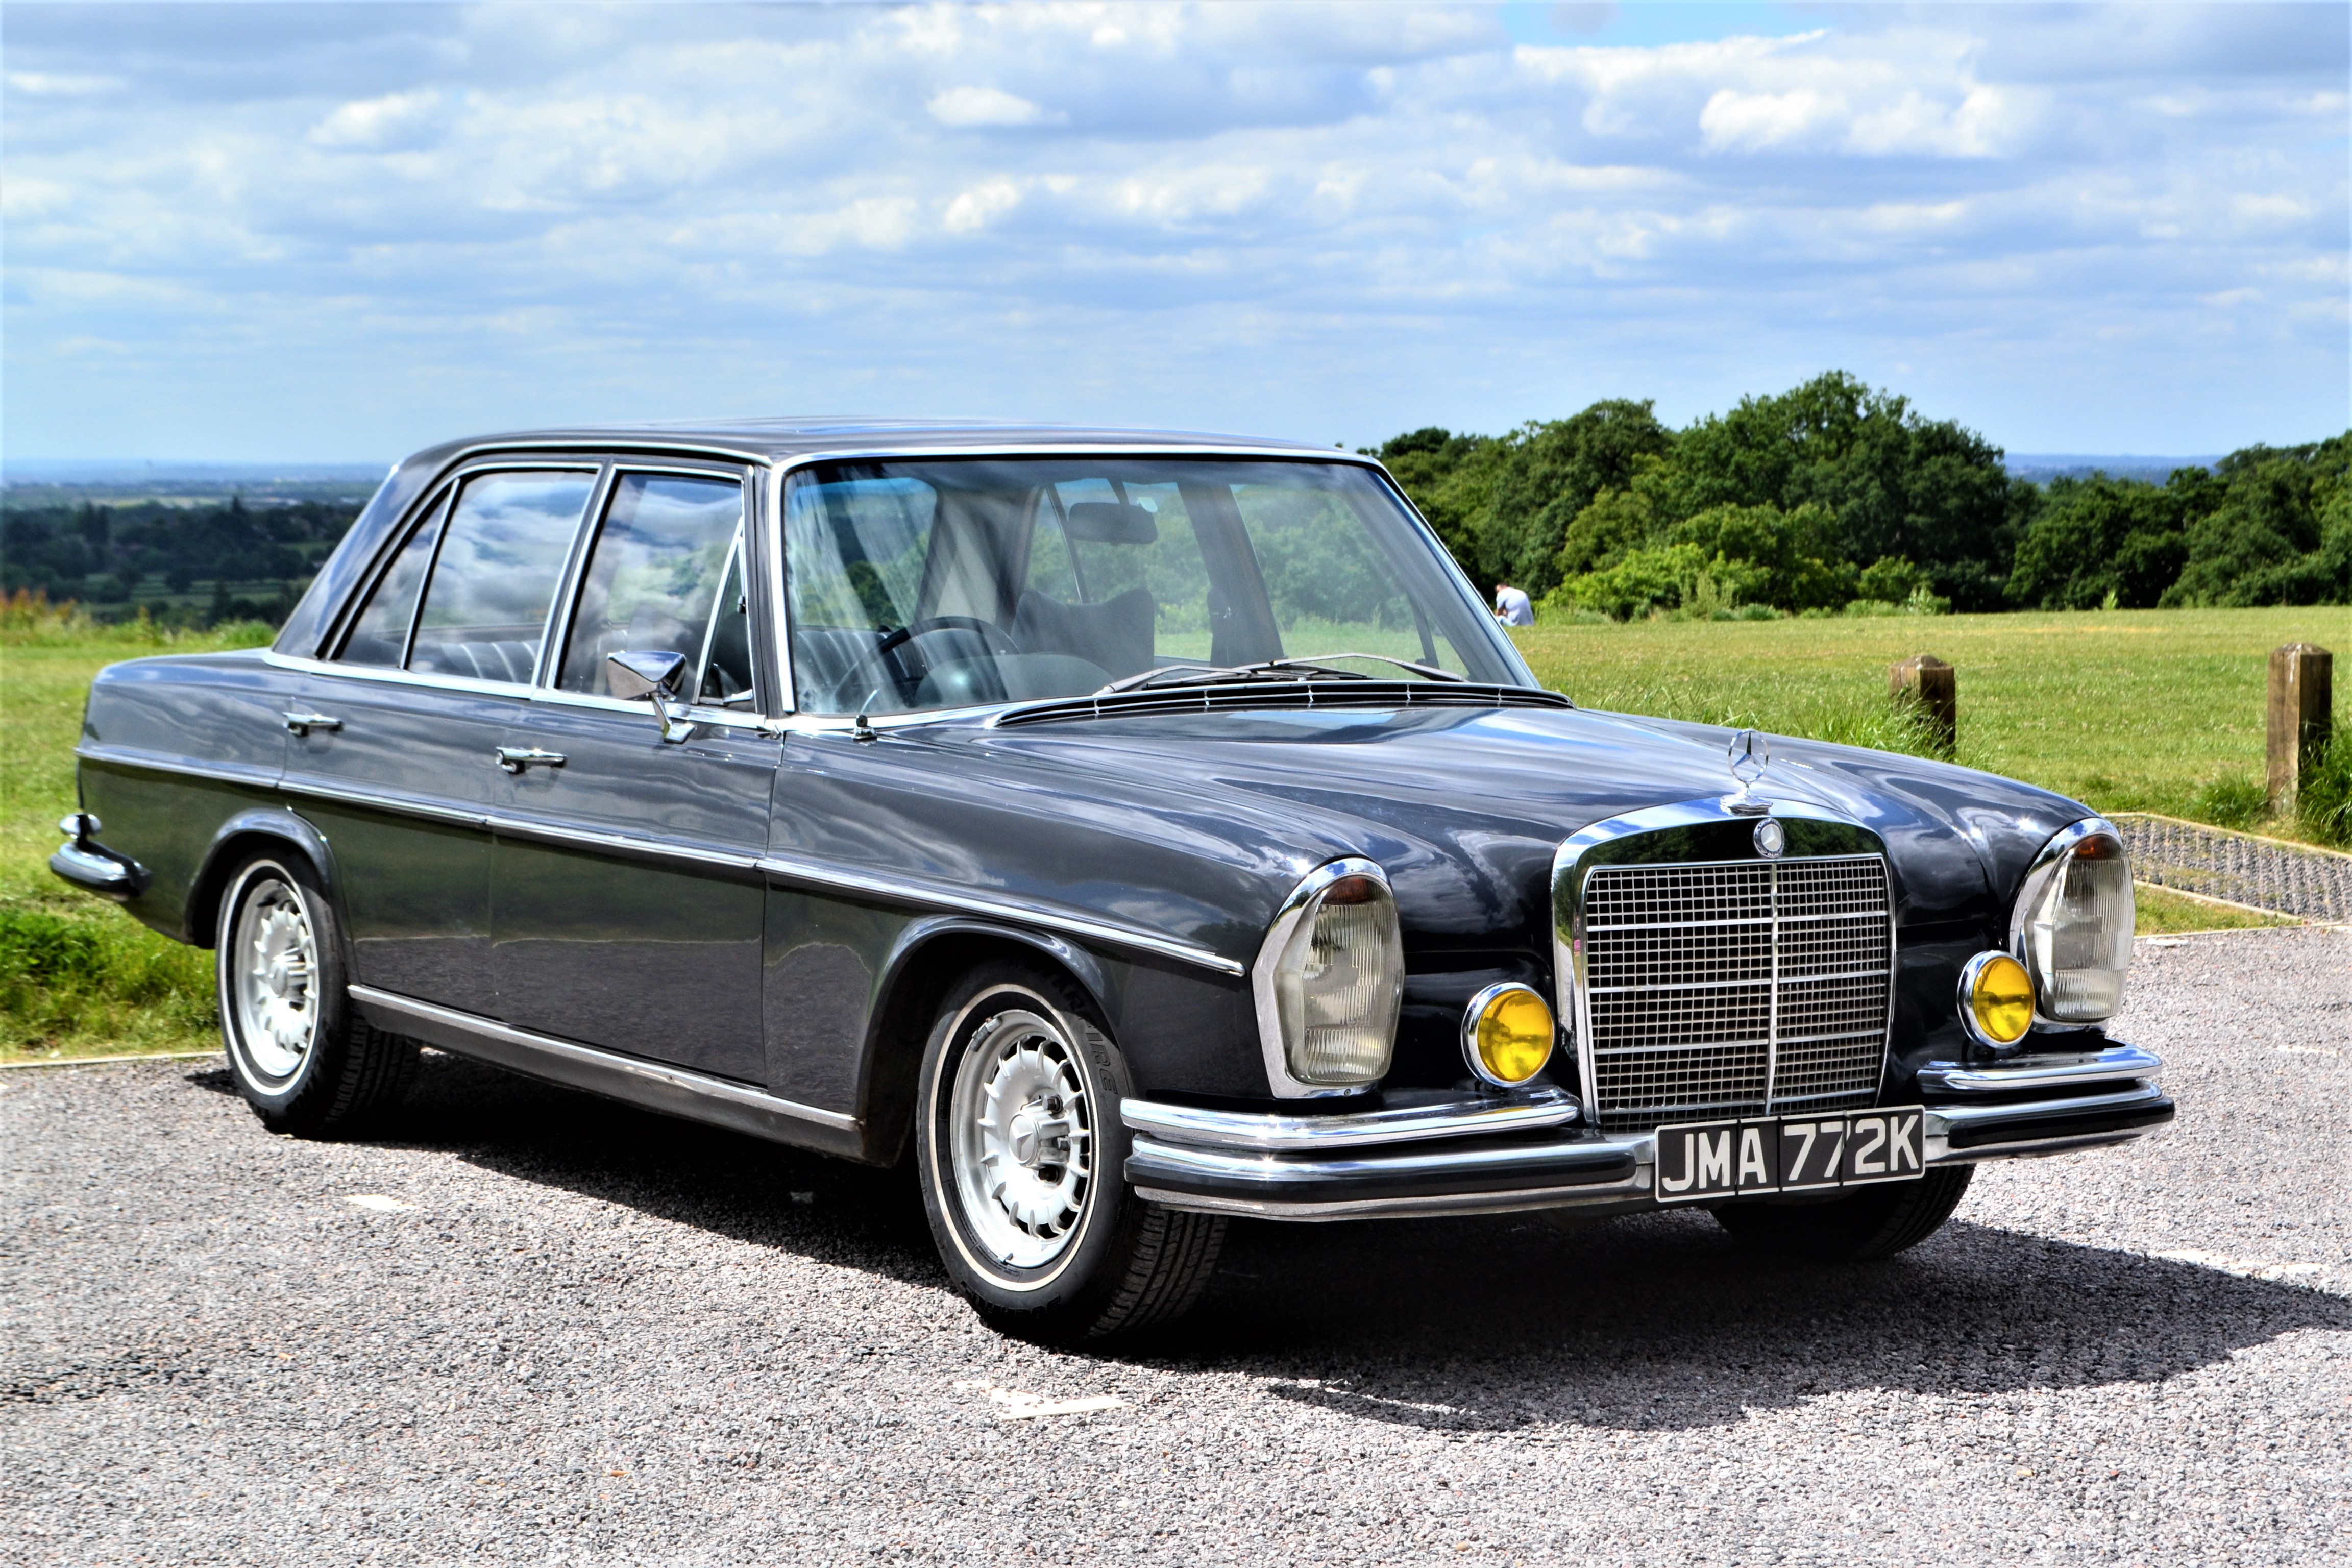 Front View of Grey Classic Mercedes fromt he early 70's with large headlights and chrome grill